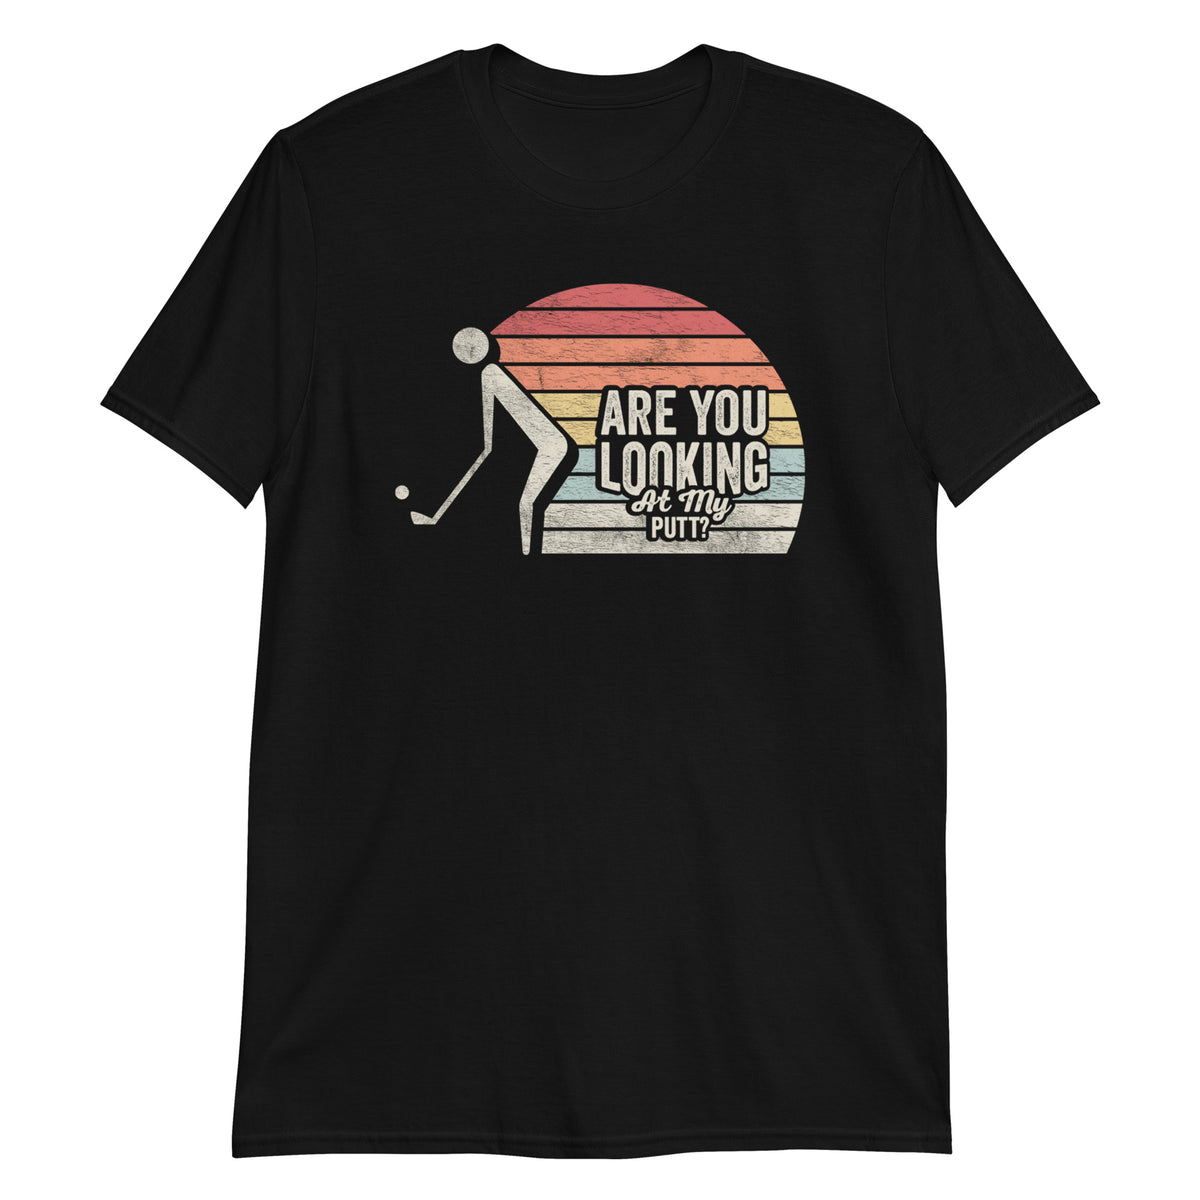 Are You Looking at My Putt T-Shirt